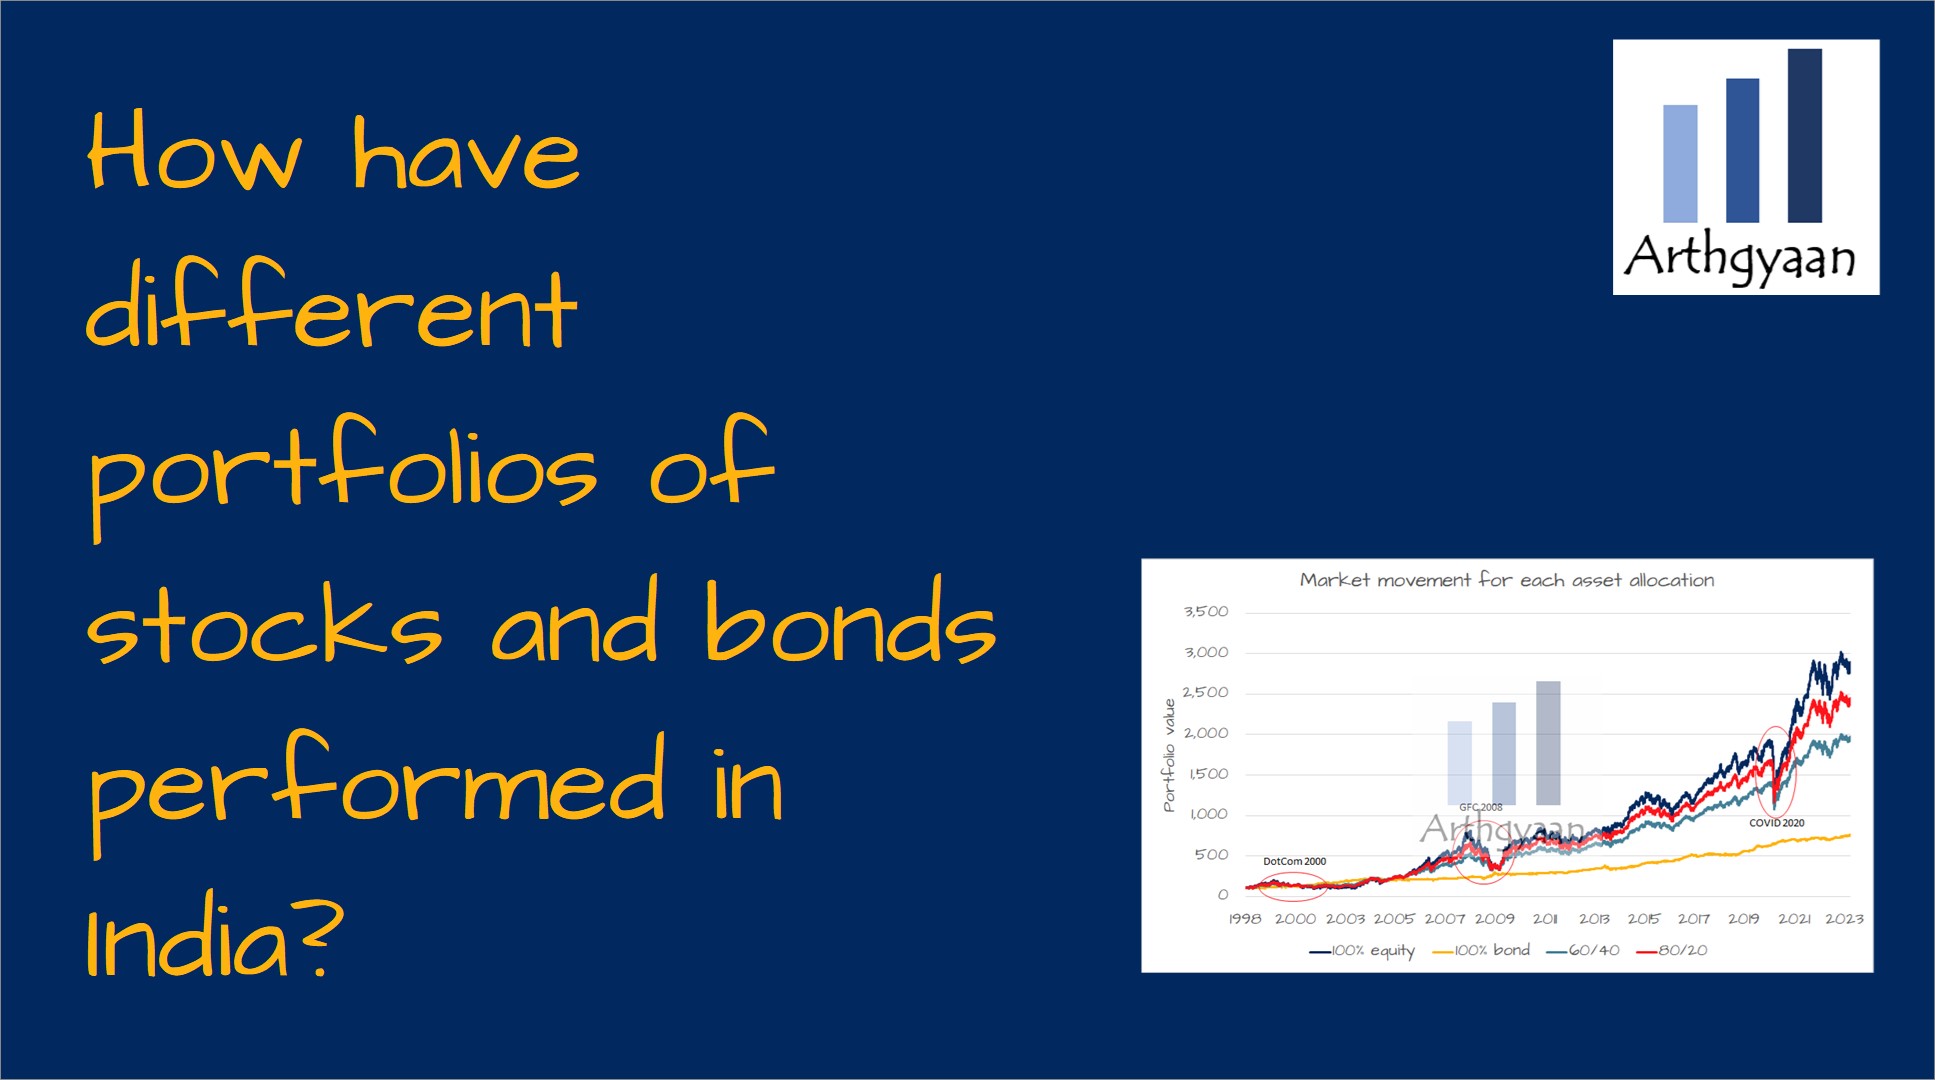 How have different portfolios of stocks and bonds performed in India?